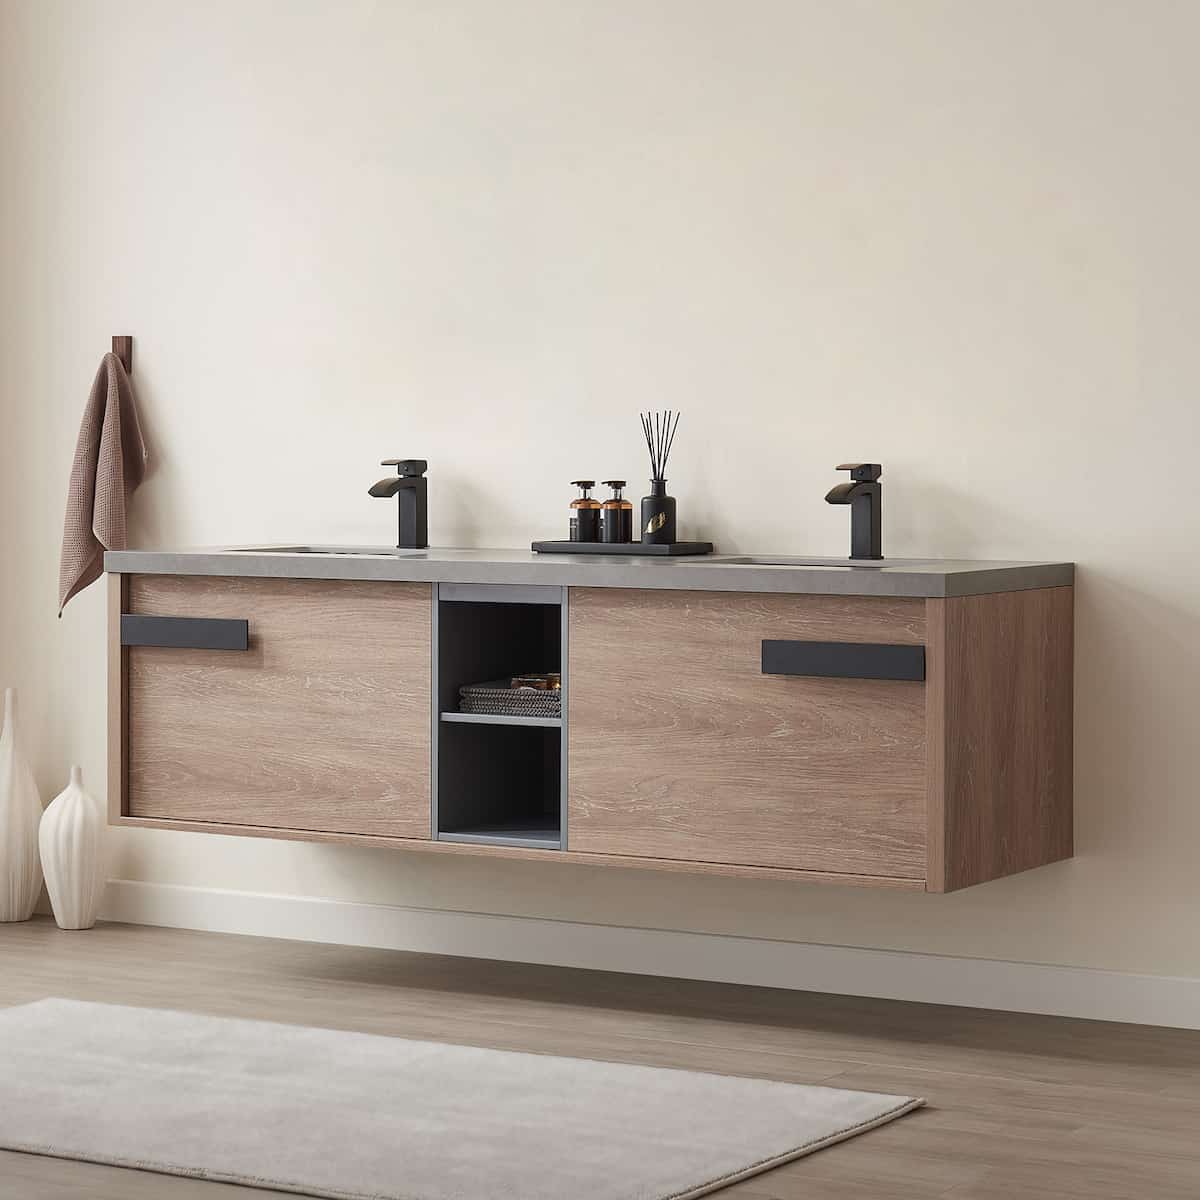 Vinnova Carcastillo 72 Inch Wall Mount Double Sink Bath Vanity in North American Oak with Grey Sintered Stone Top Without Mirror Side 703272-NO-WK-NM #mirror_without mirror